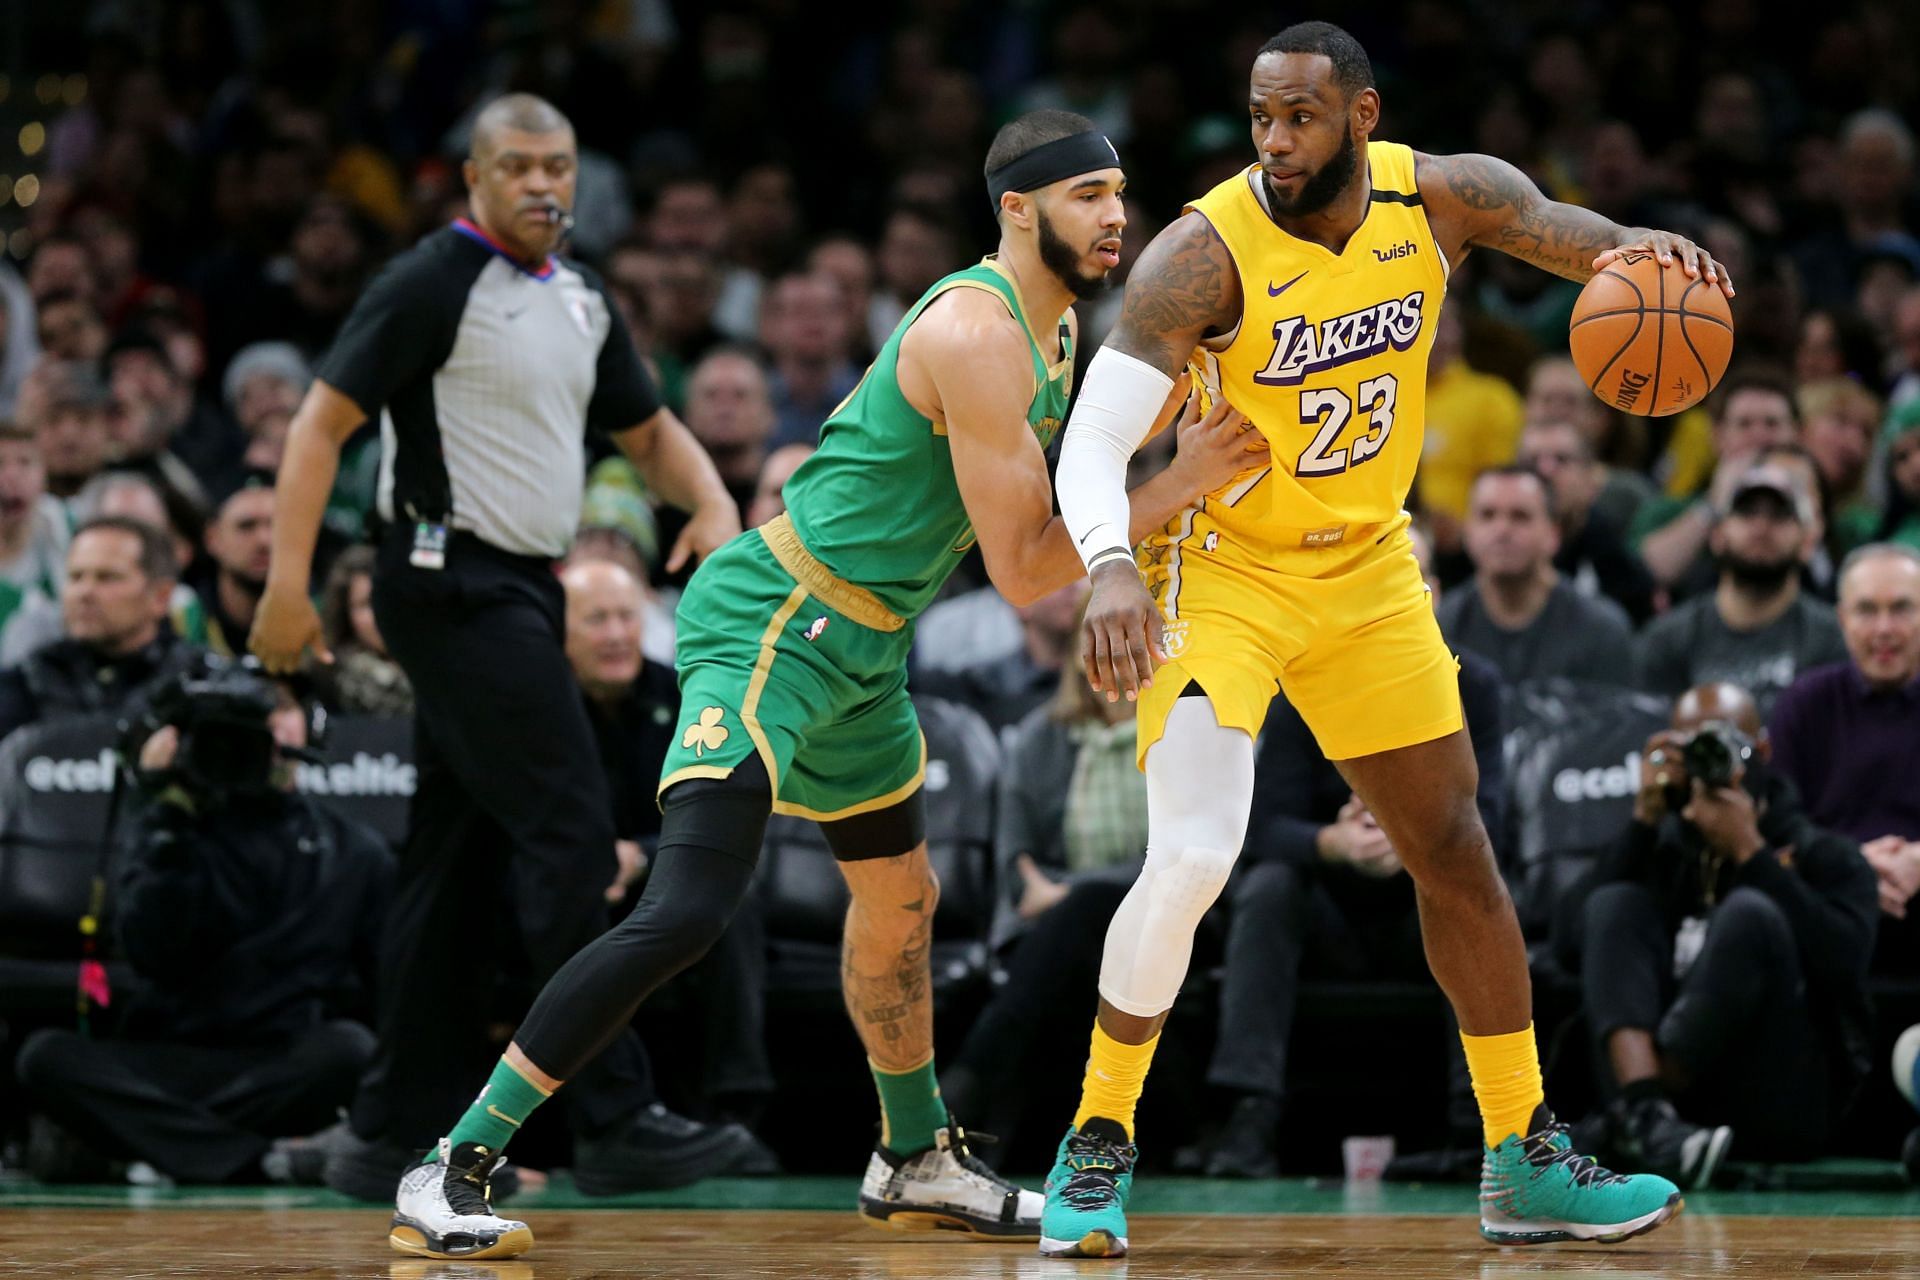 Stephen A. Smith believes LA Lakers should have drafted Tatum over Lonzo Ball